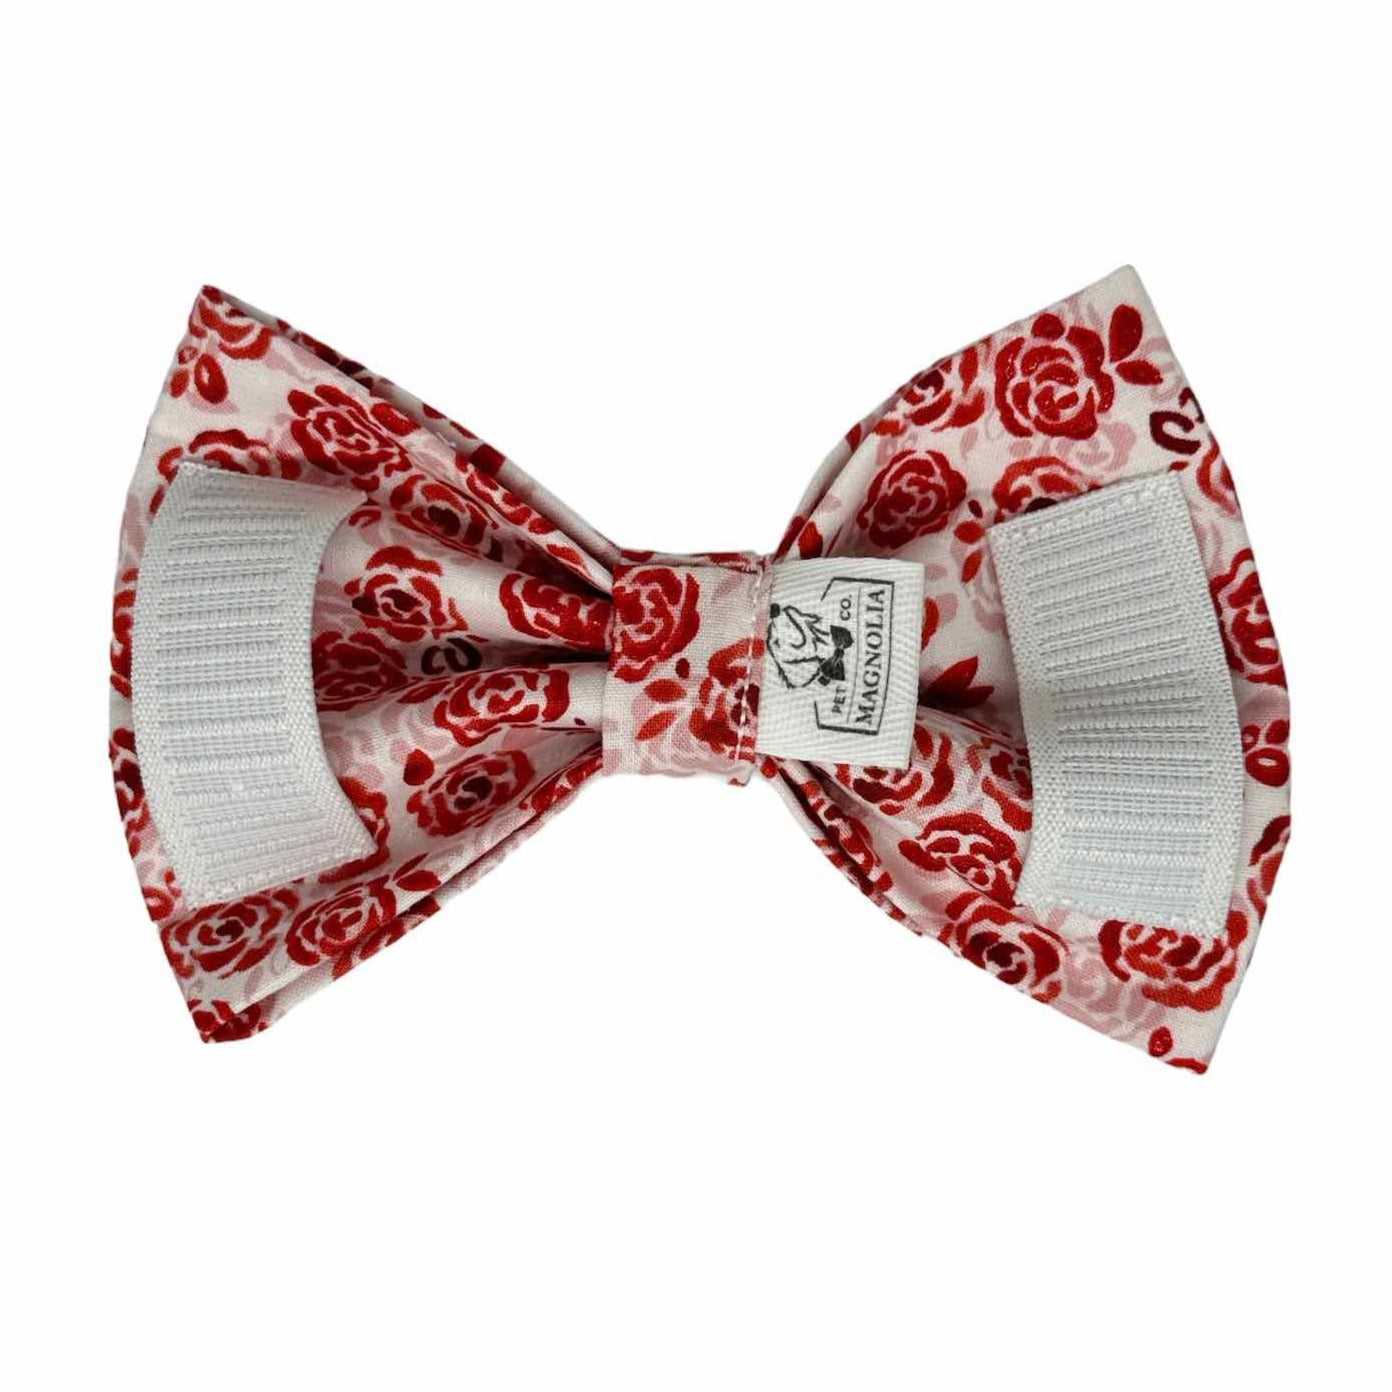 Sparkle Red Rose Calico Dog Bow Tie